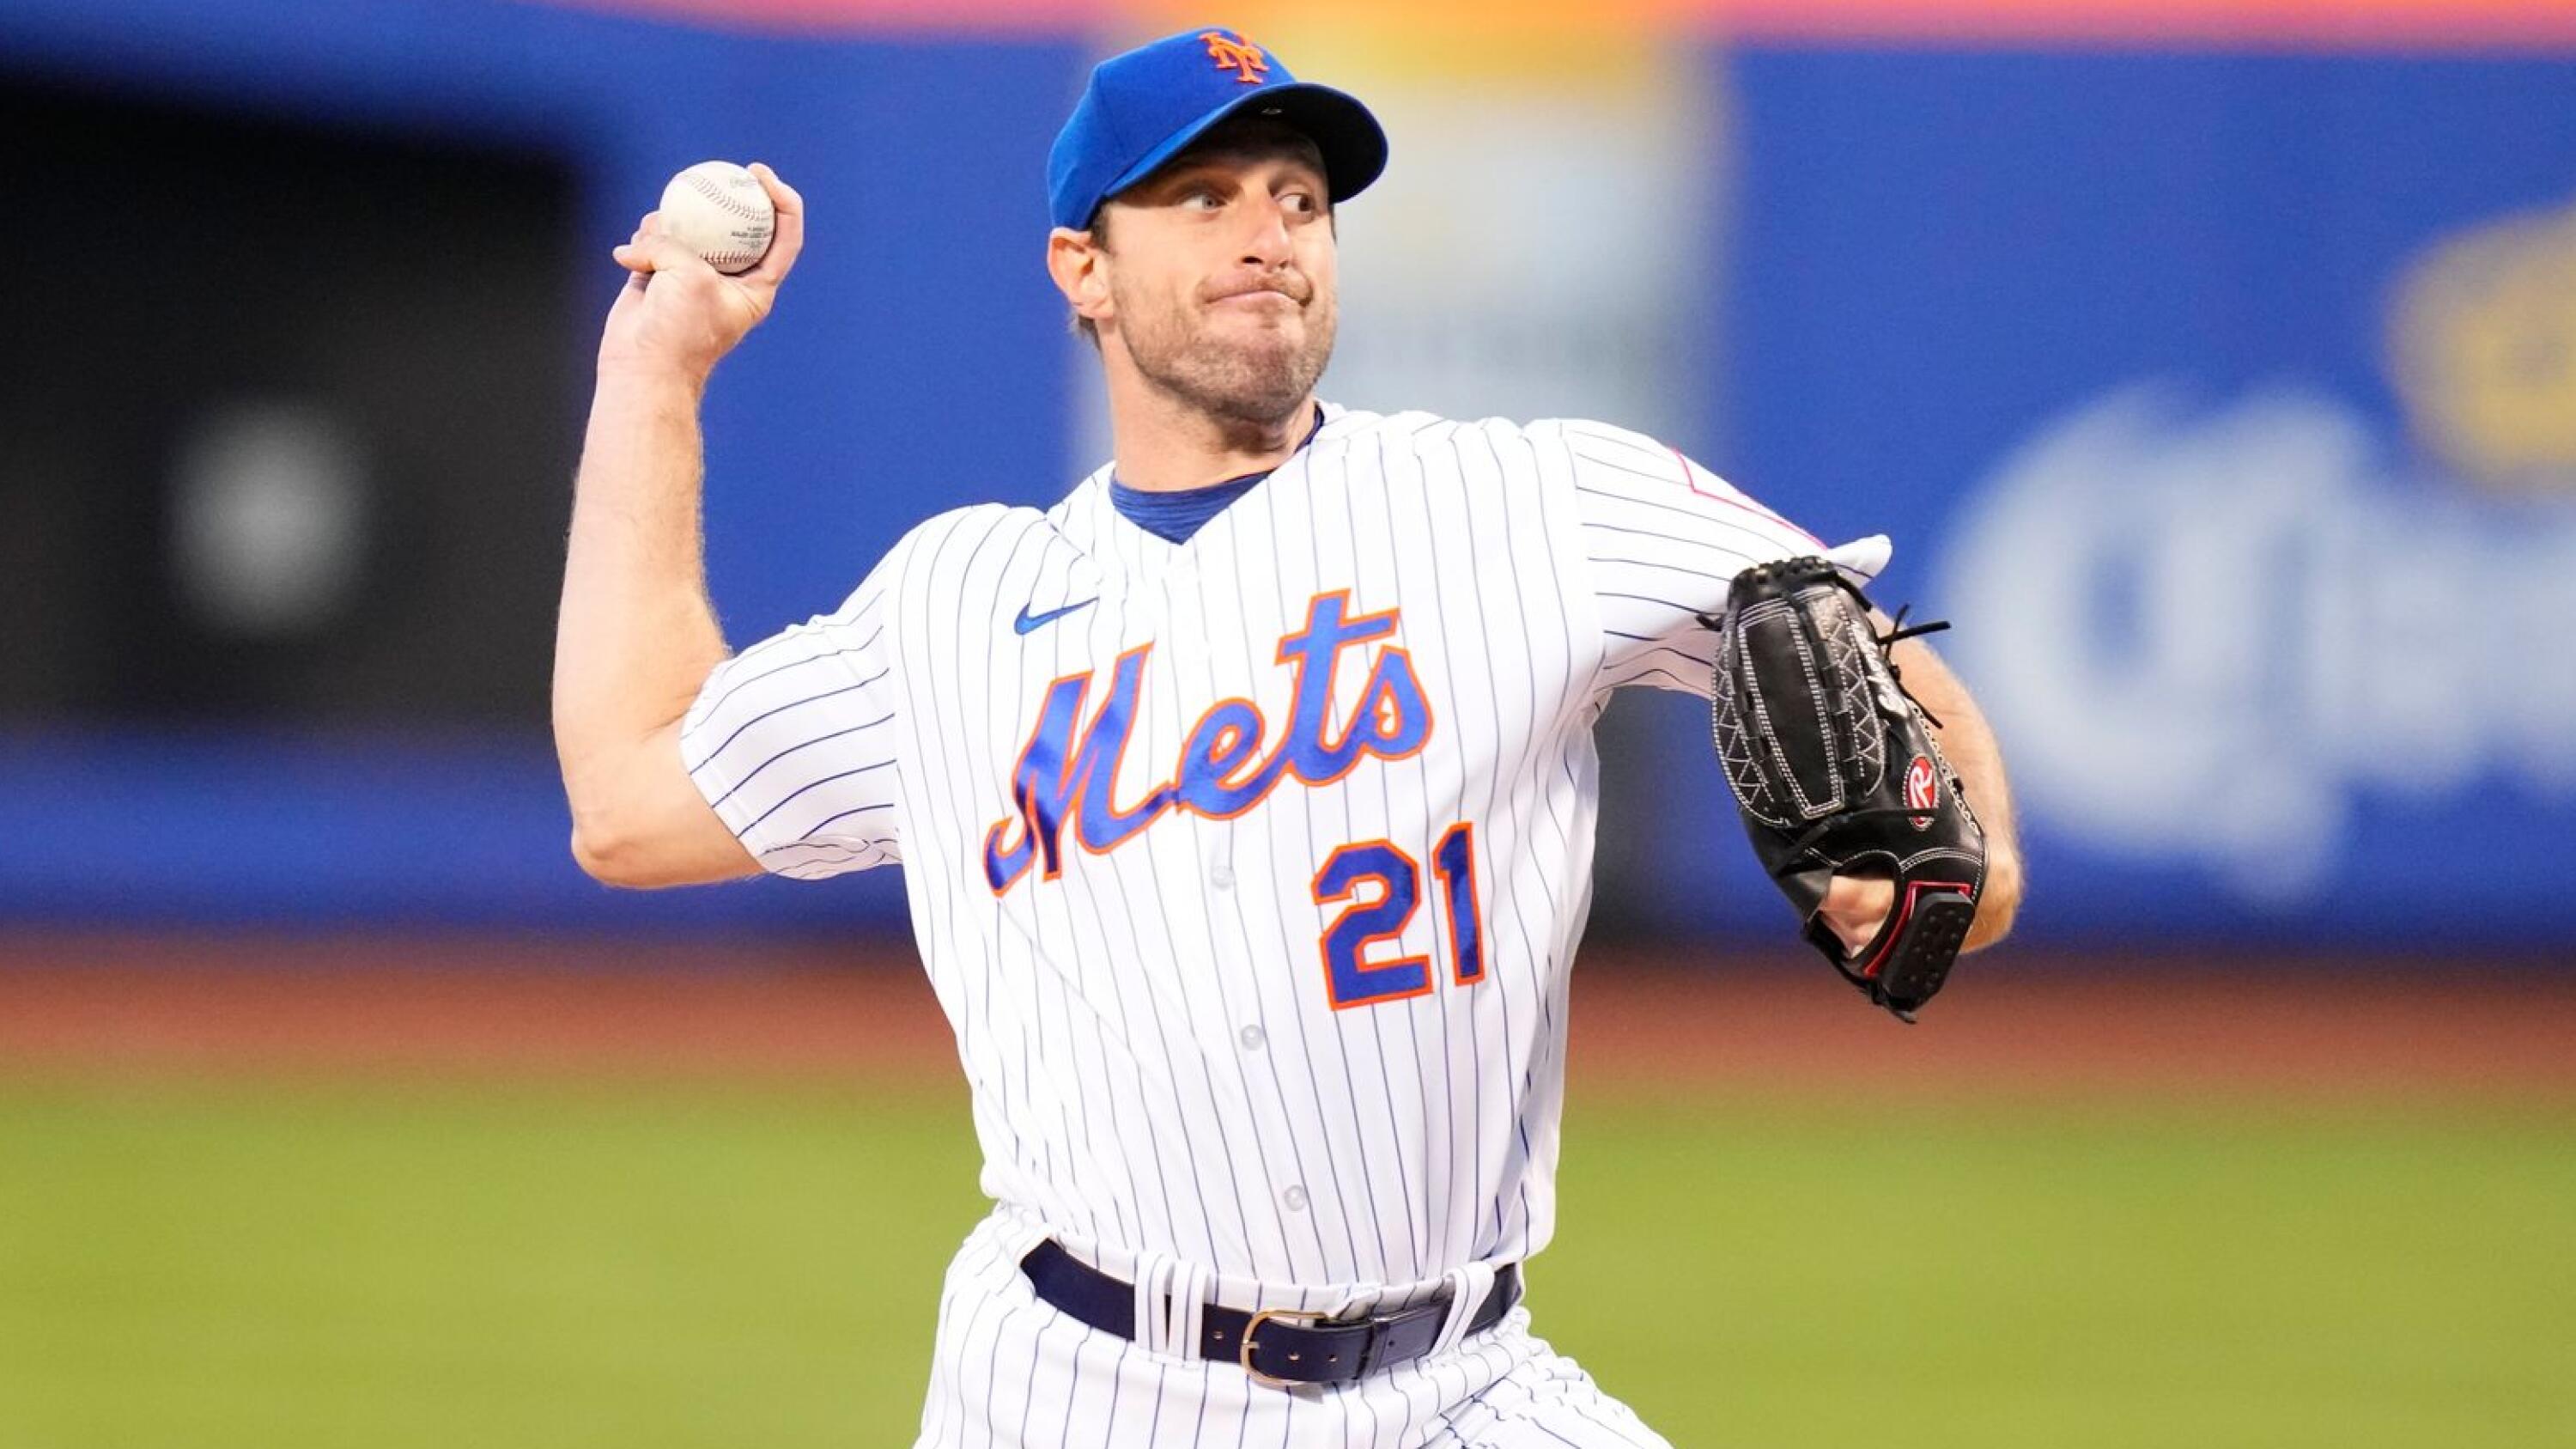 Jacob DeGrom makes pitch for Cy Young as Mets blank Braves